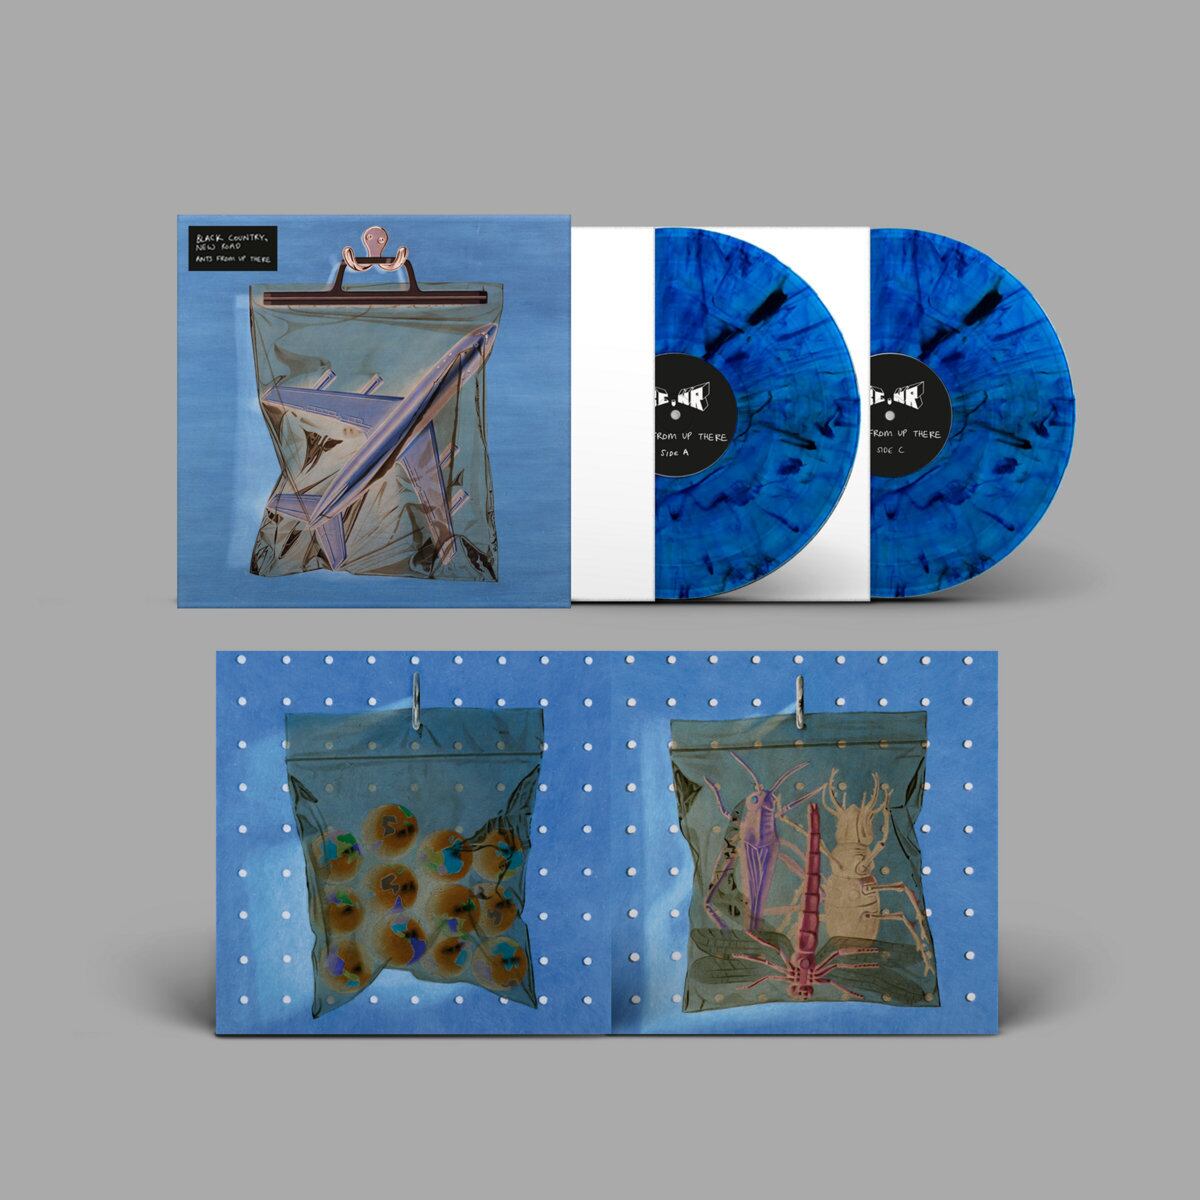 Black Country, New Road / Ants From Up There（Ltd Blue 2LP）